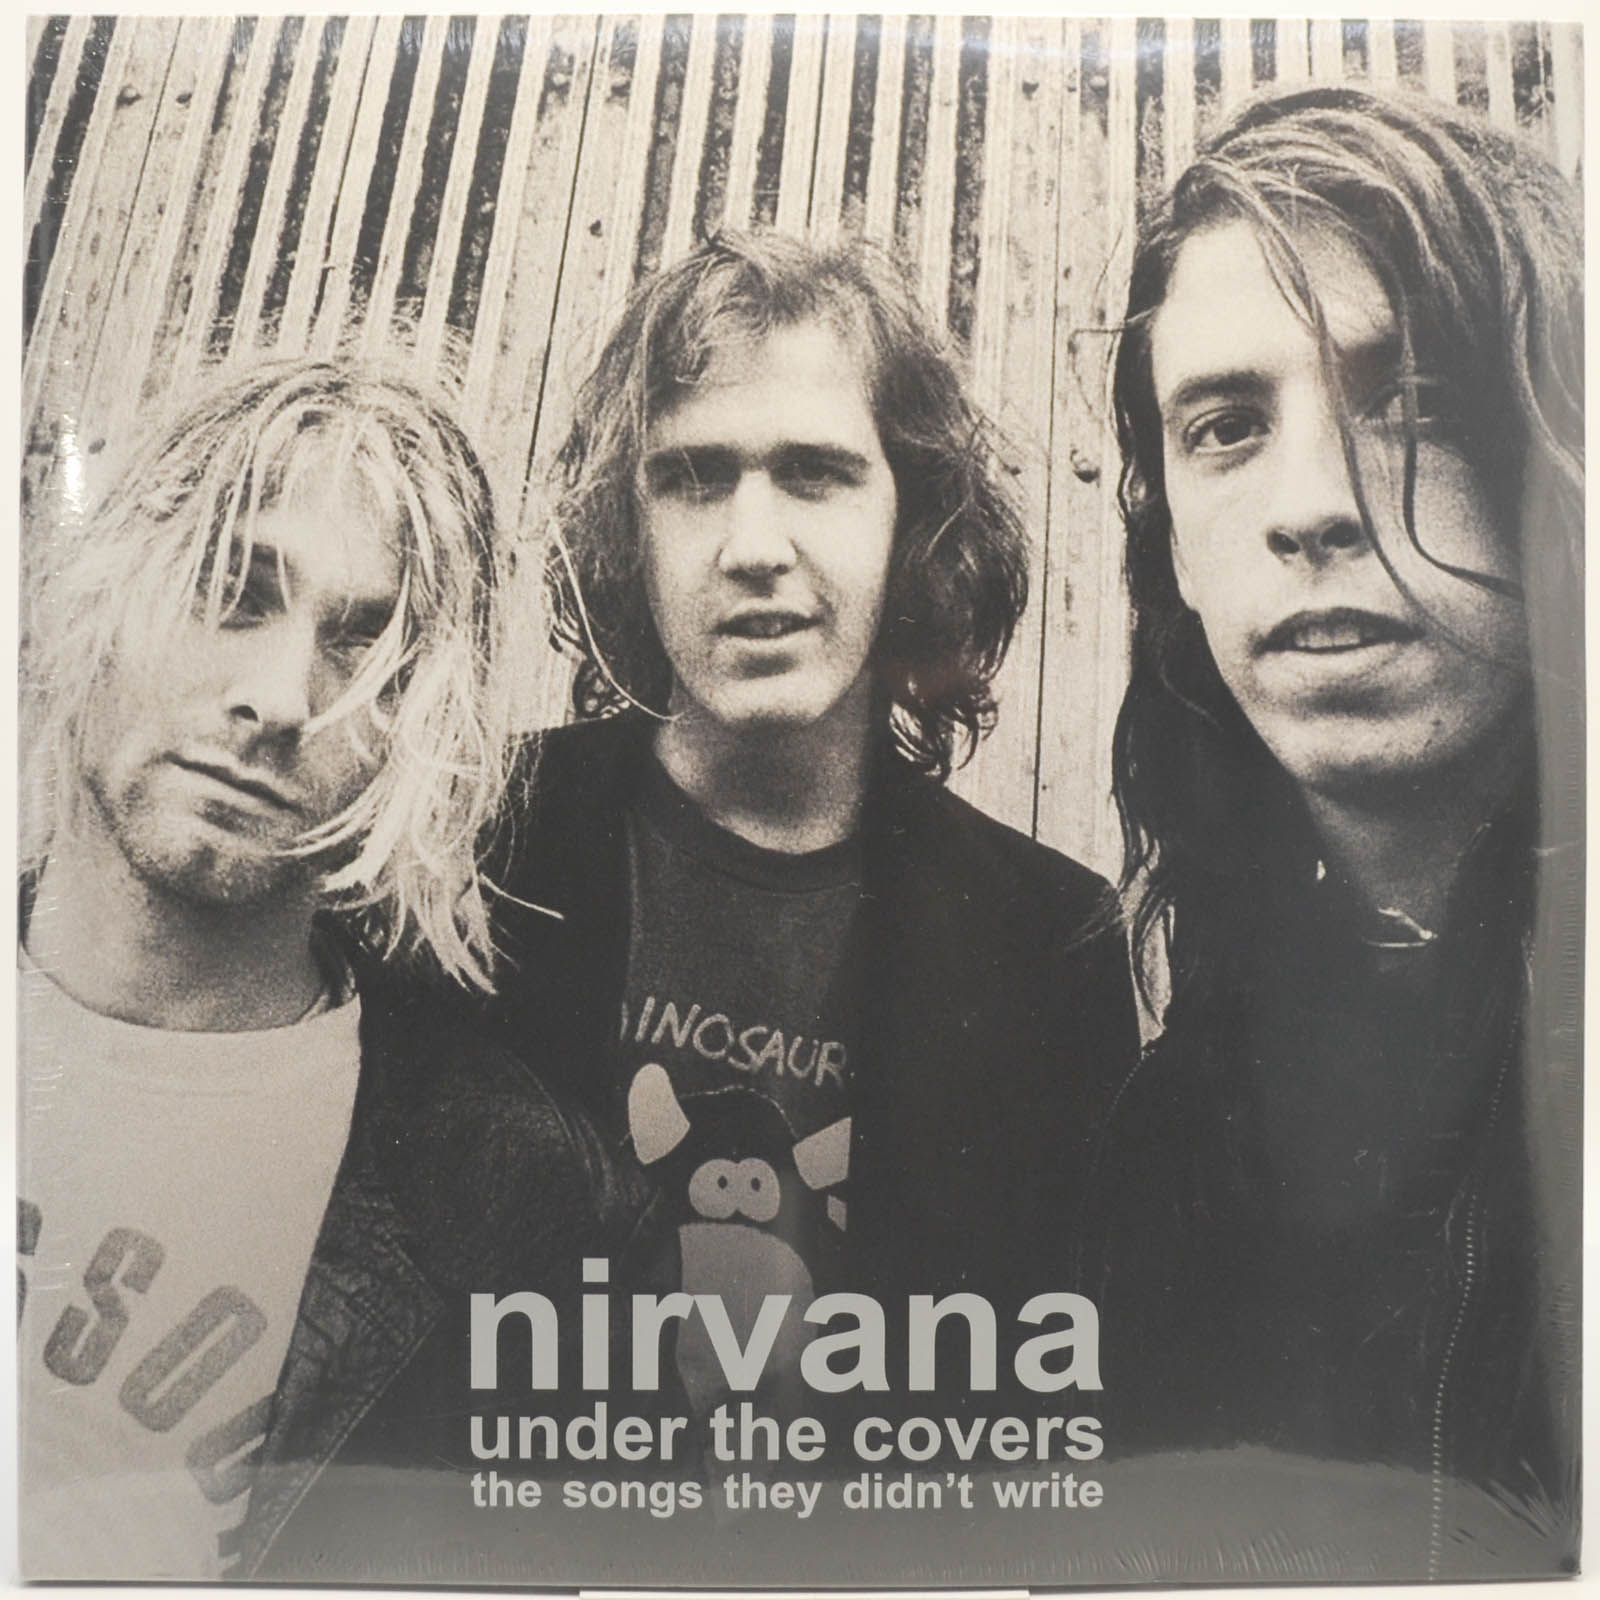 Nirvana — Under The Covers (The Songs They Didn't Write) (2LP), 2020